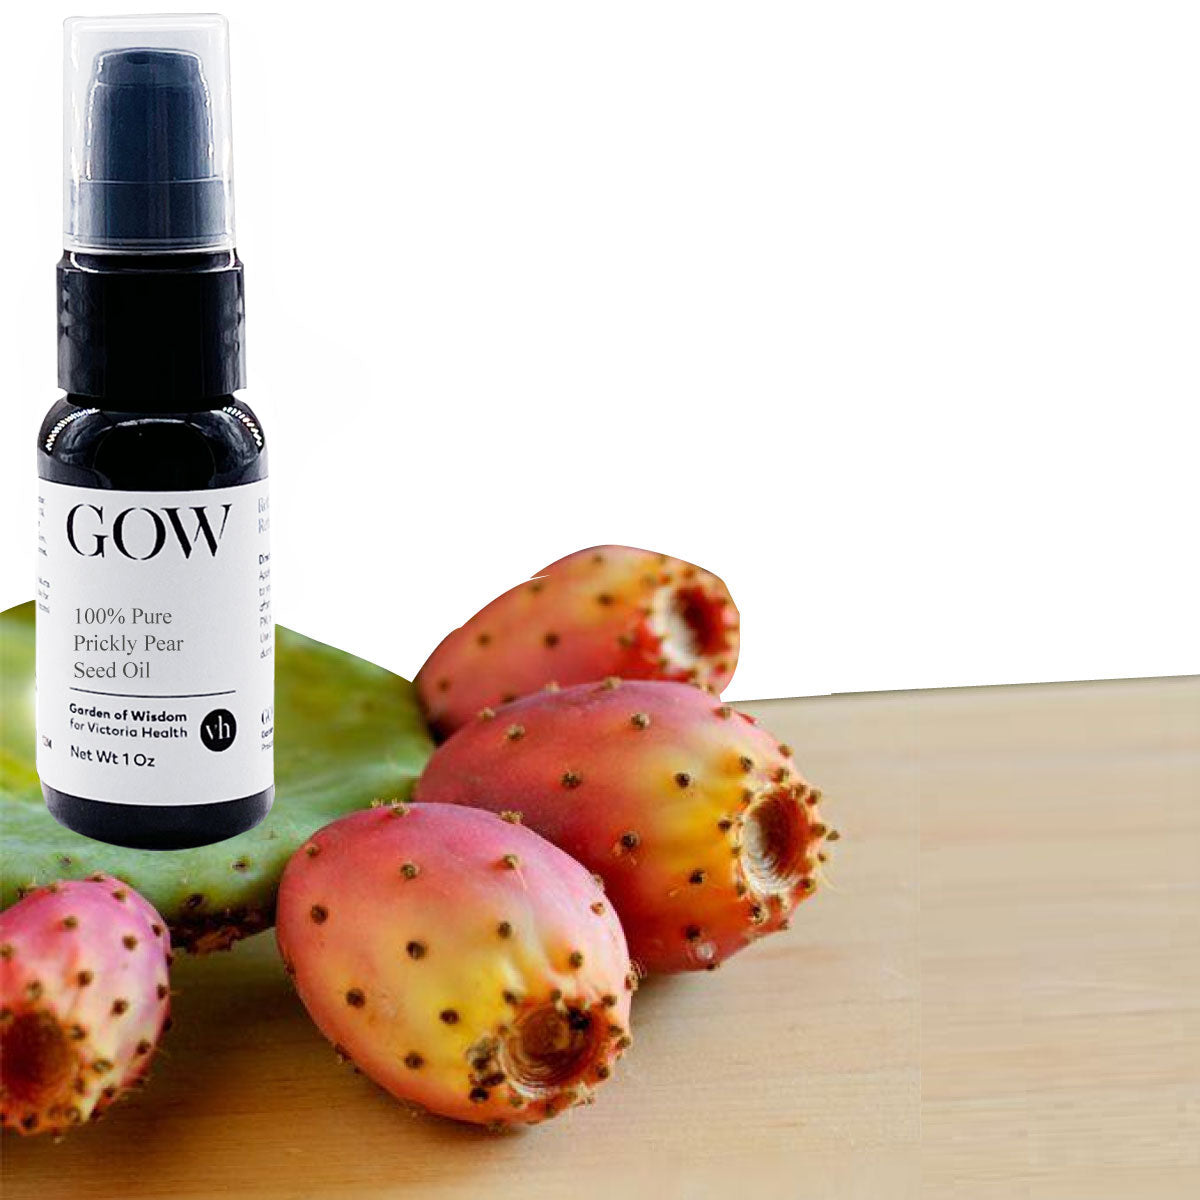 100% Pure Prickly Pear Seed Oil